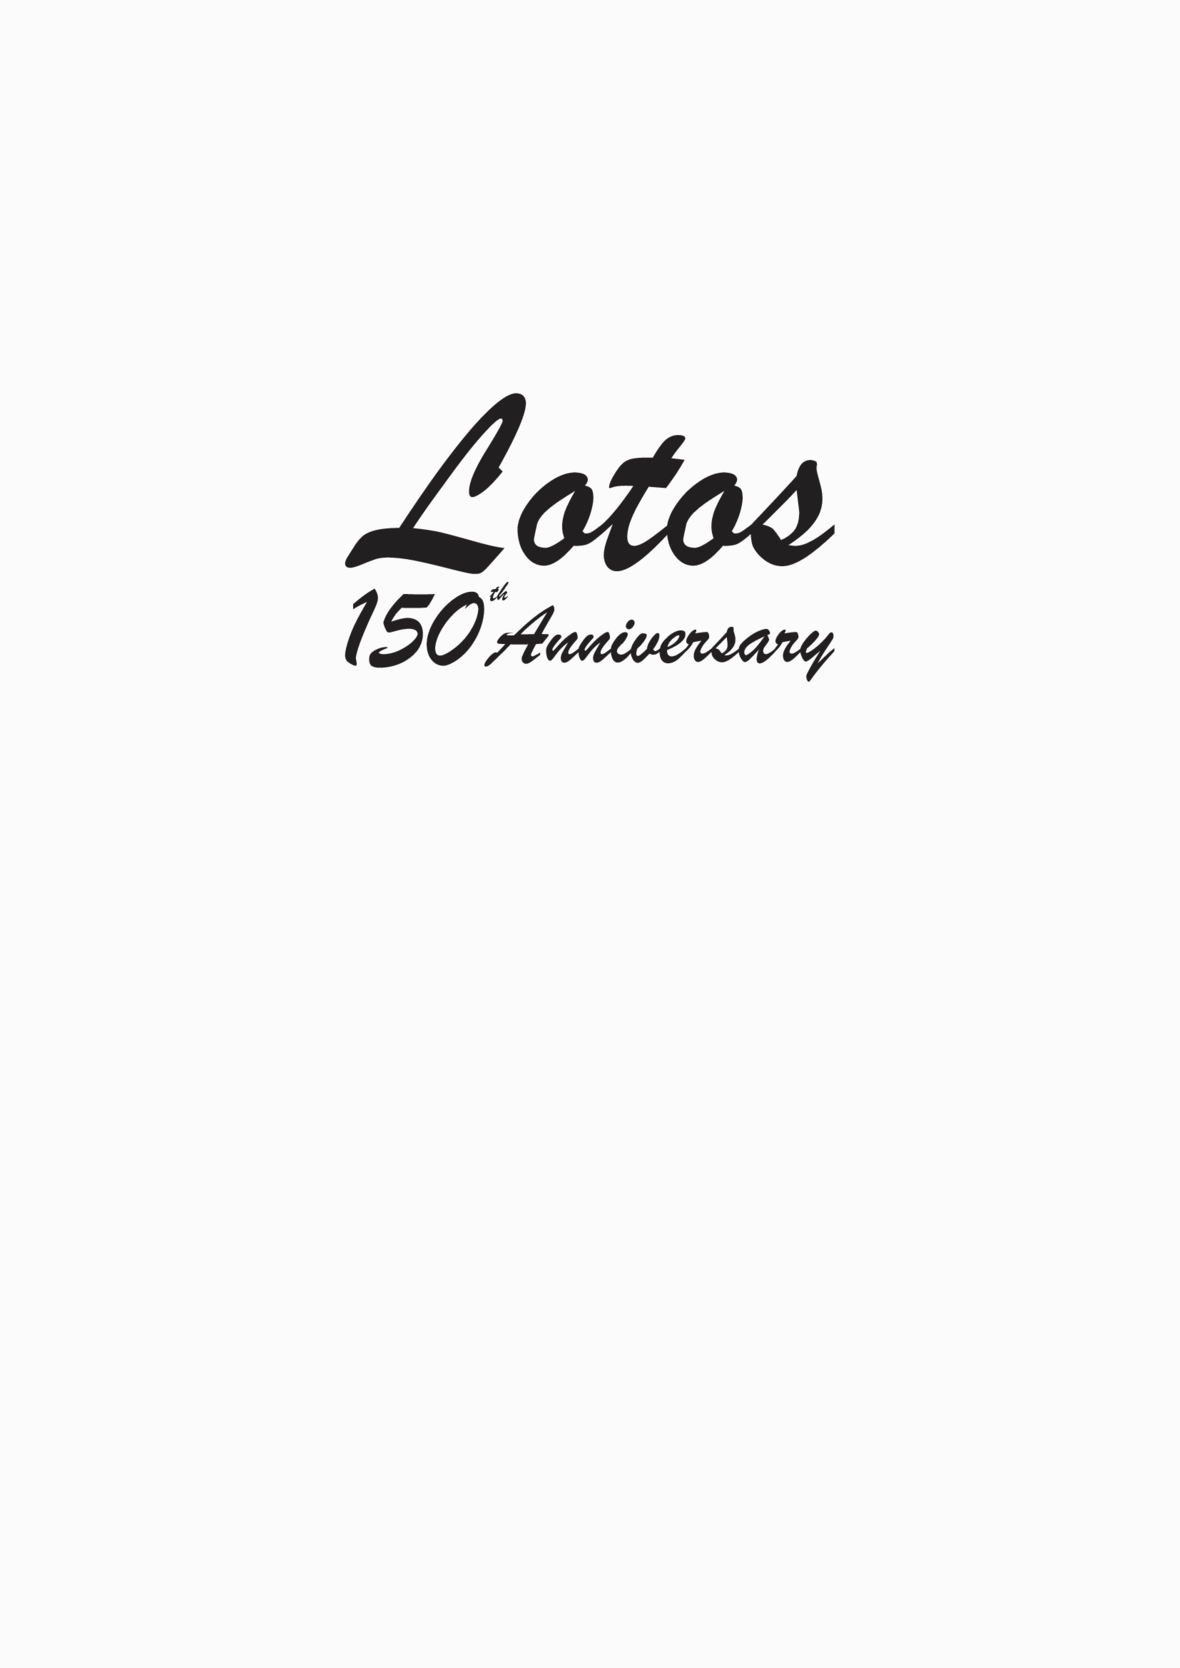 lotos-150th-anniversary-brand-book-simplify-chinese